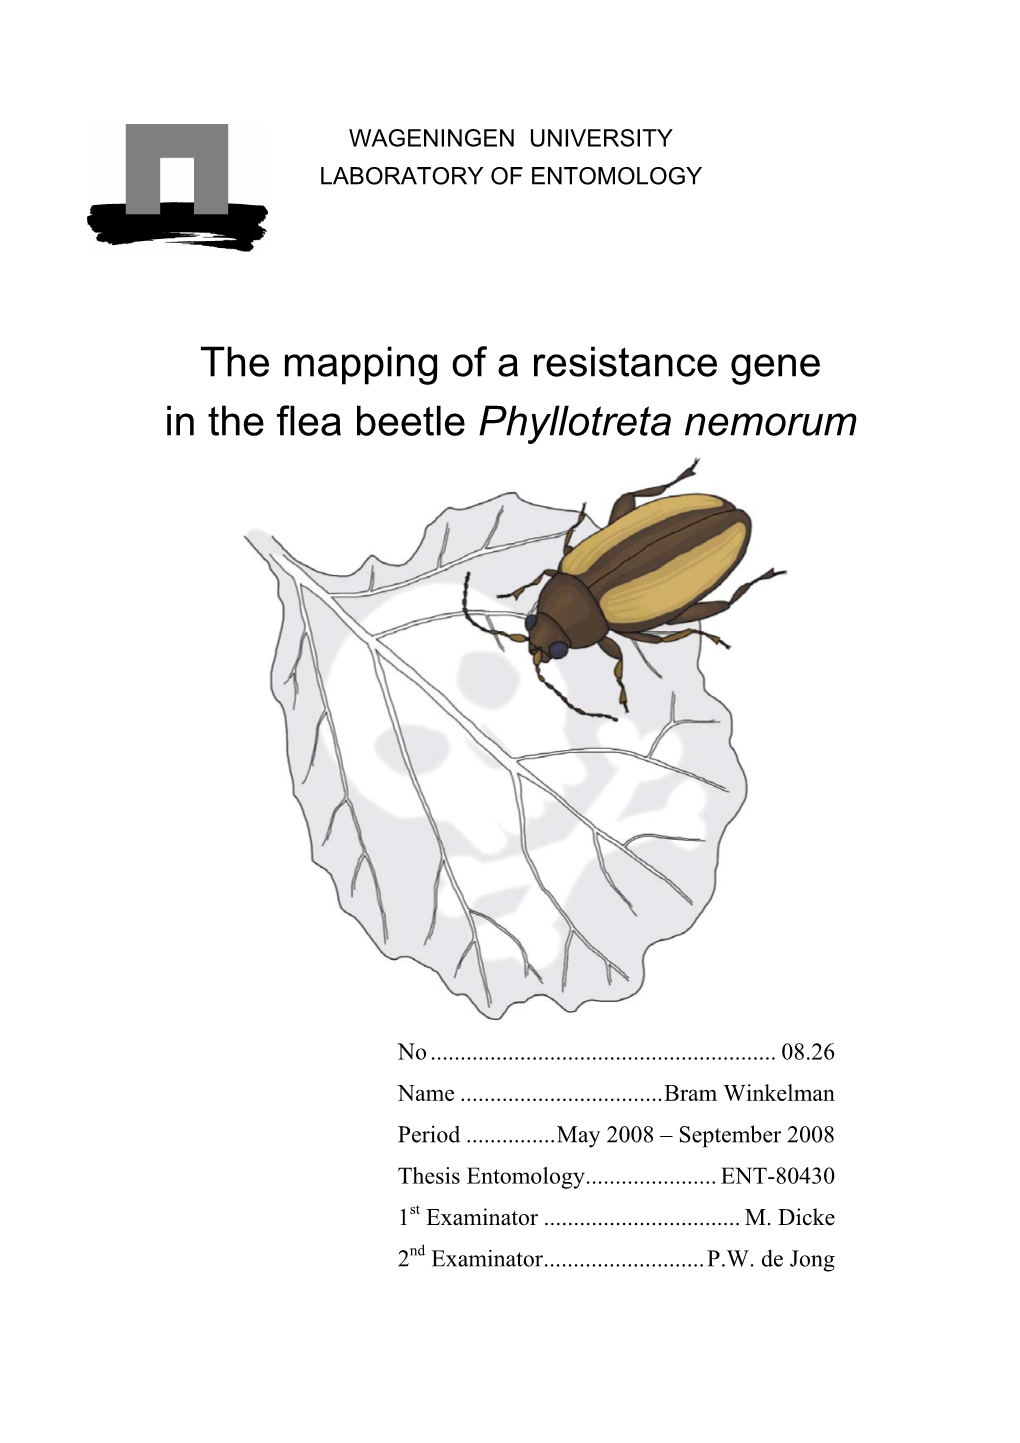 The Mapping of a Resistance Gene in the Flea Beetle Phyllotreta Nemorum